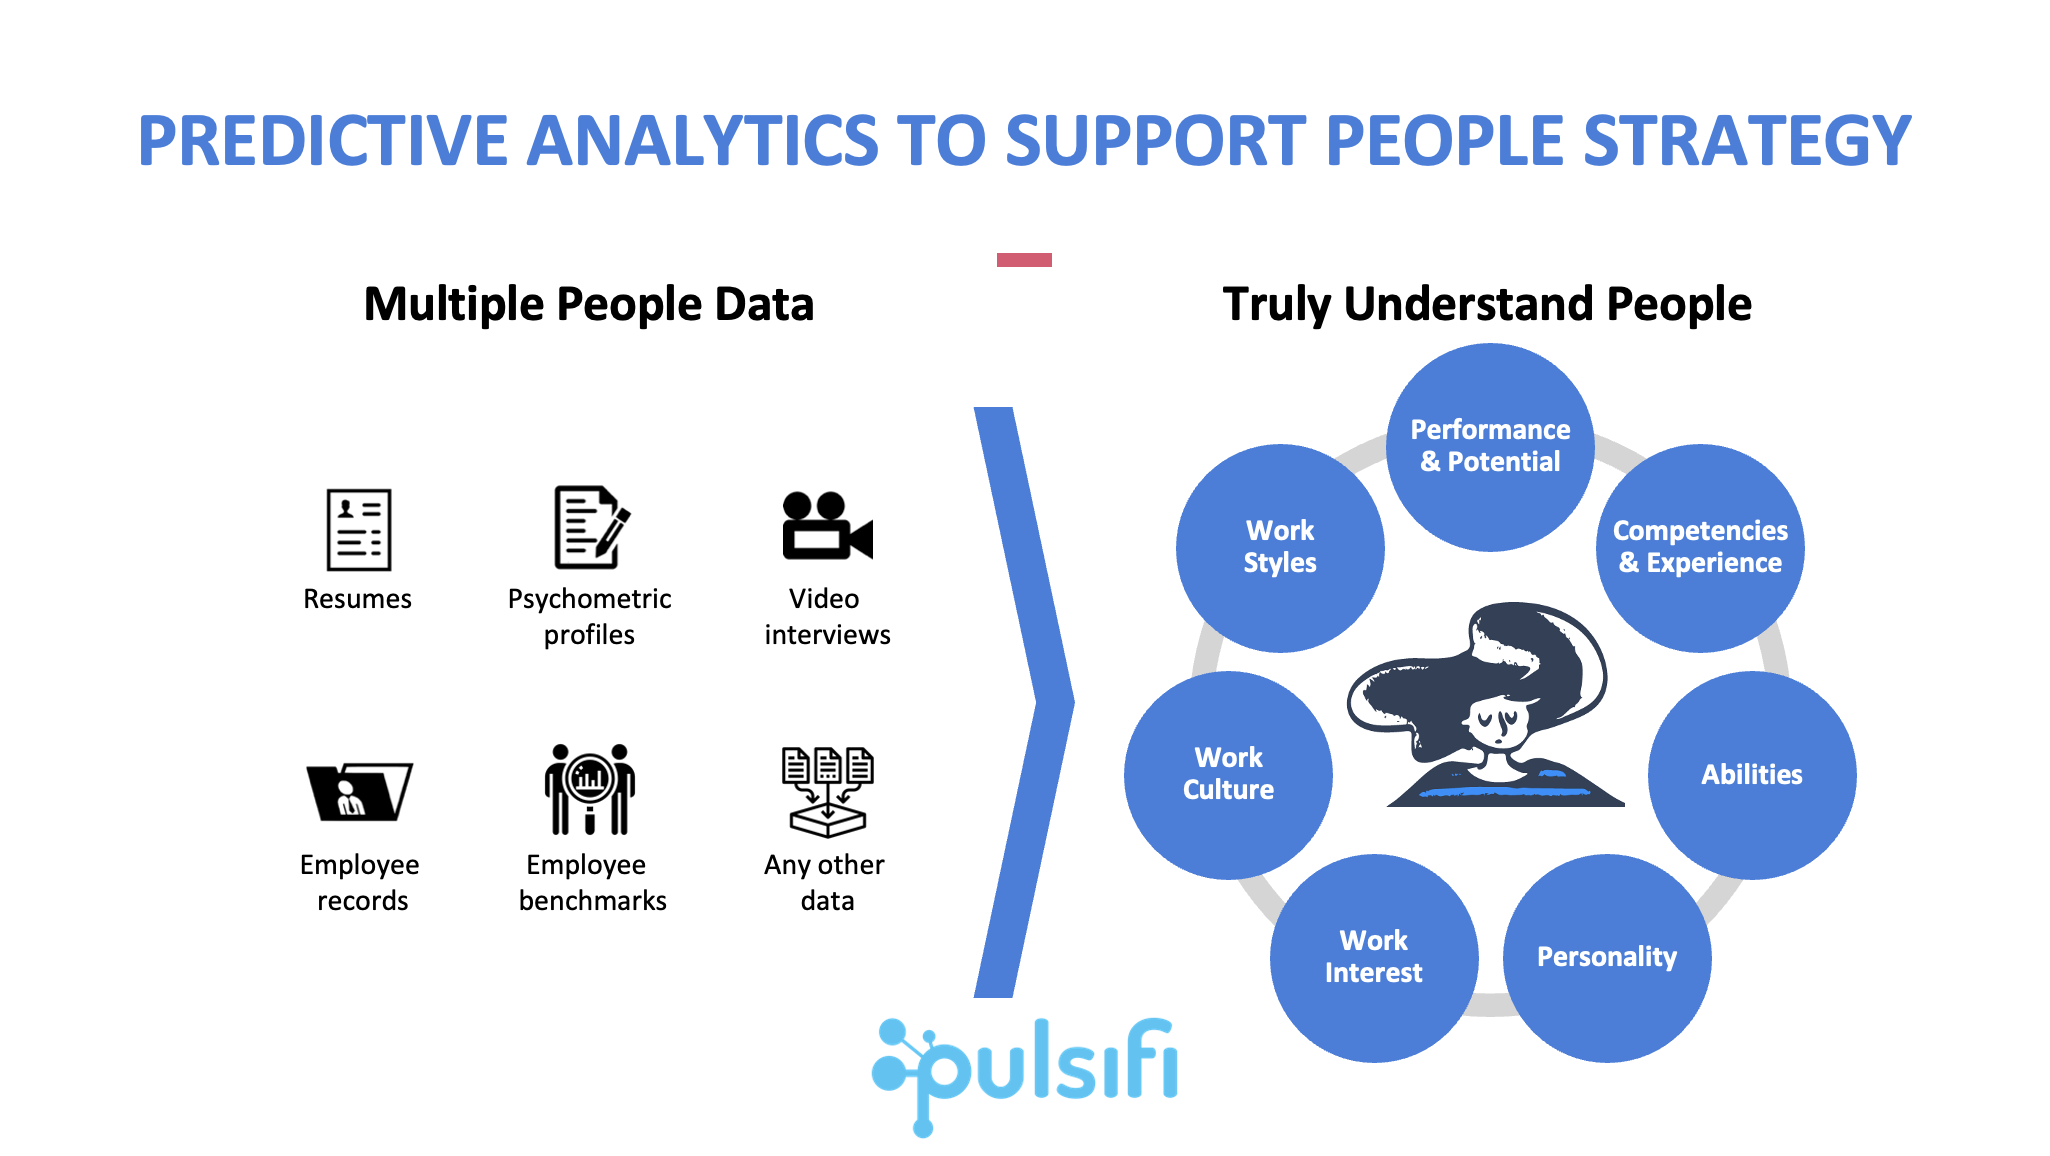 Pulsifi's platform unifies and analyzes multiple data such as resumes, psychometric assessments, video interviews, employee records, etc, to truly understand hard skills and soft traits of each person, accurately predict job performance and candidate fit